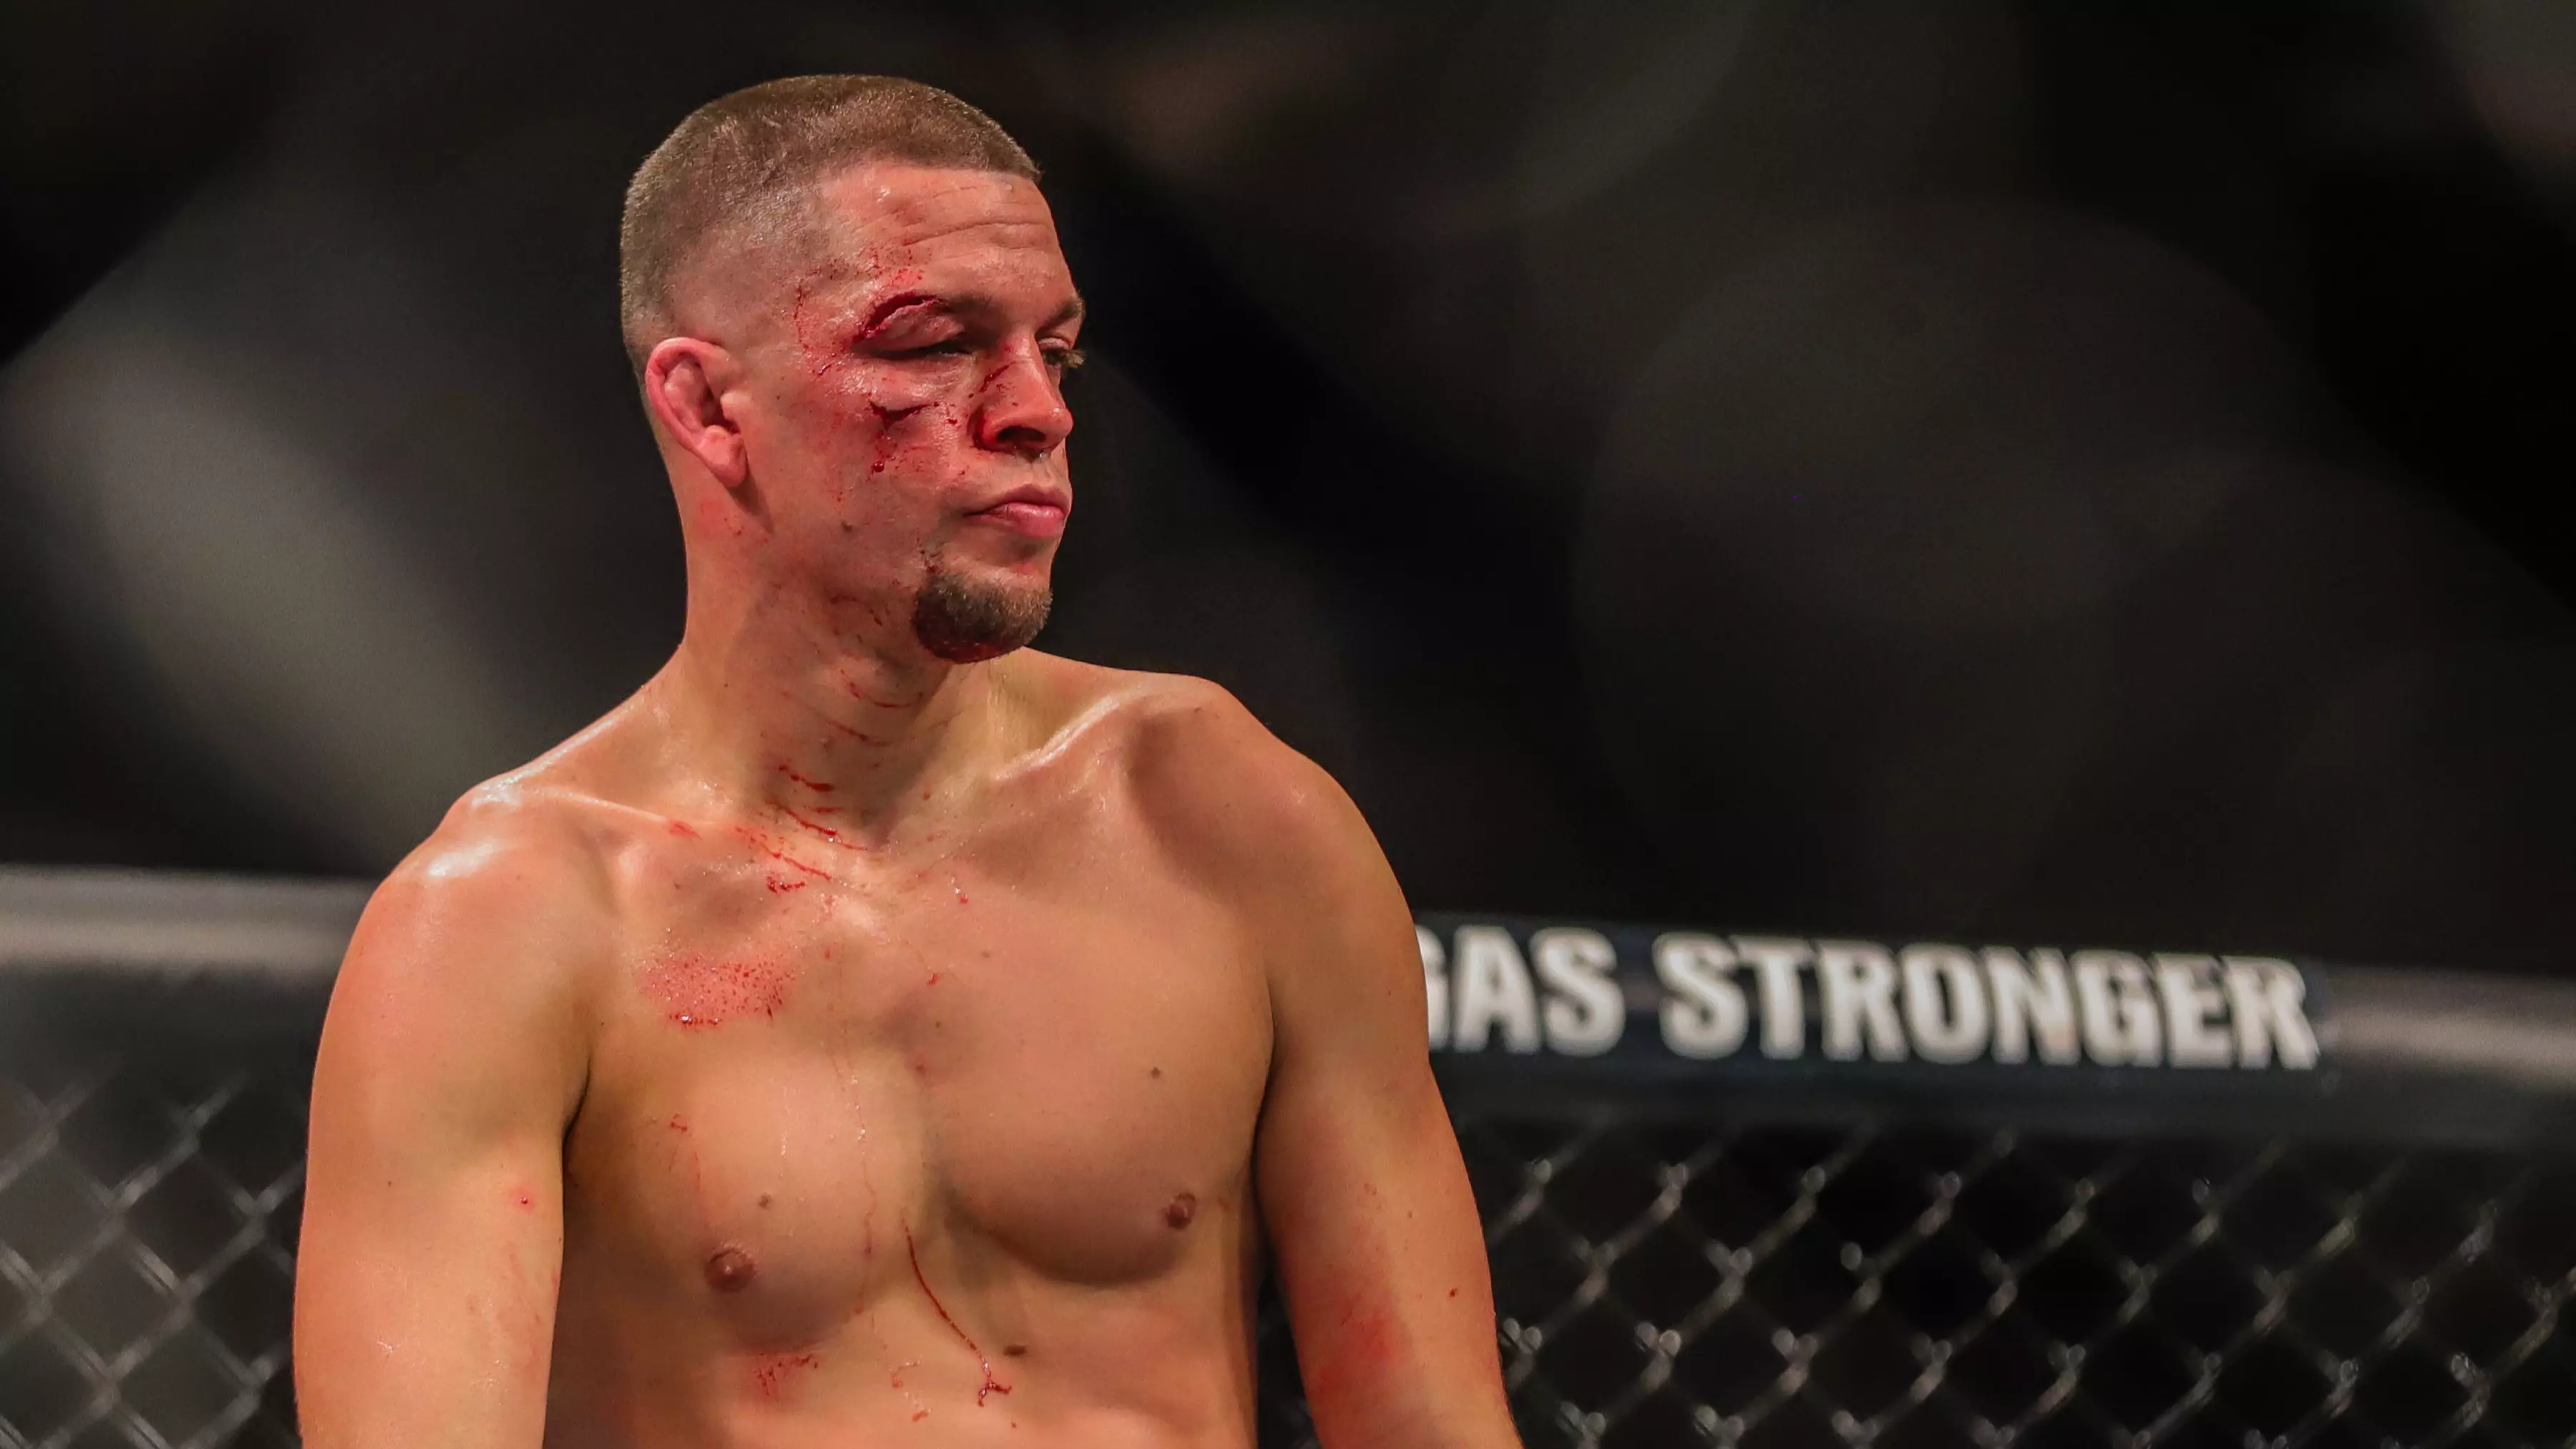 Nate Diaz Declares Himself As The GOAT In Response To Conor McGregor's Rankings